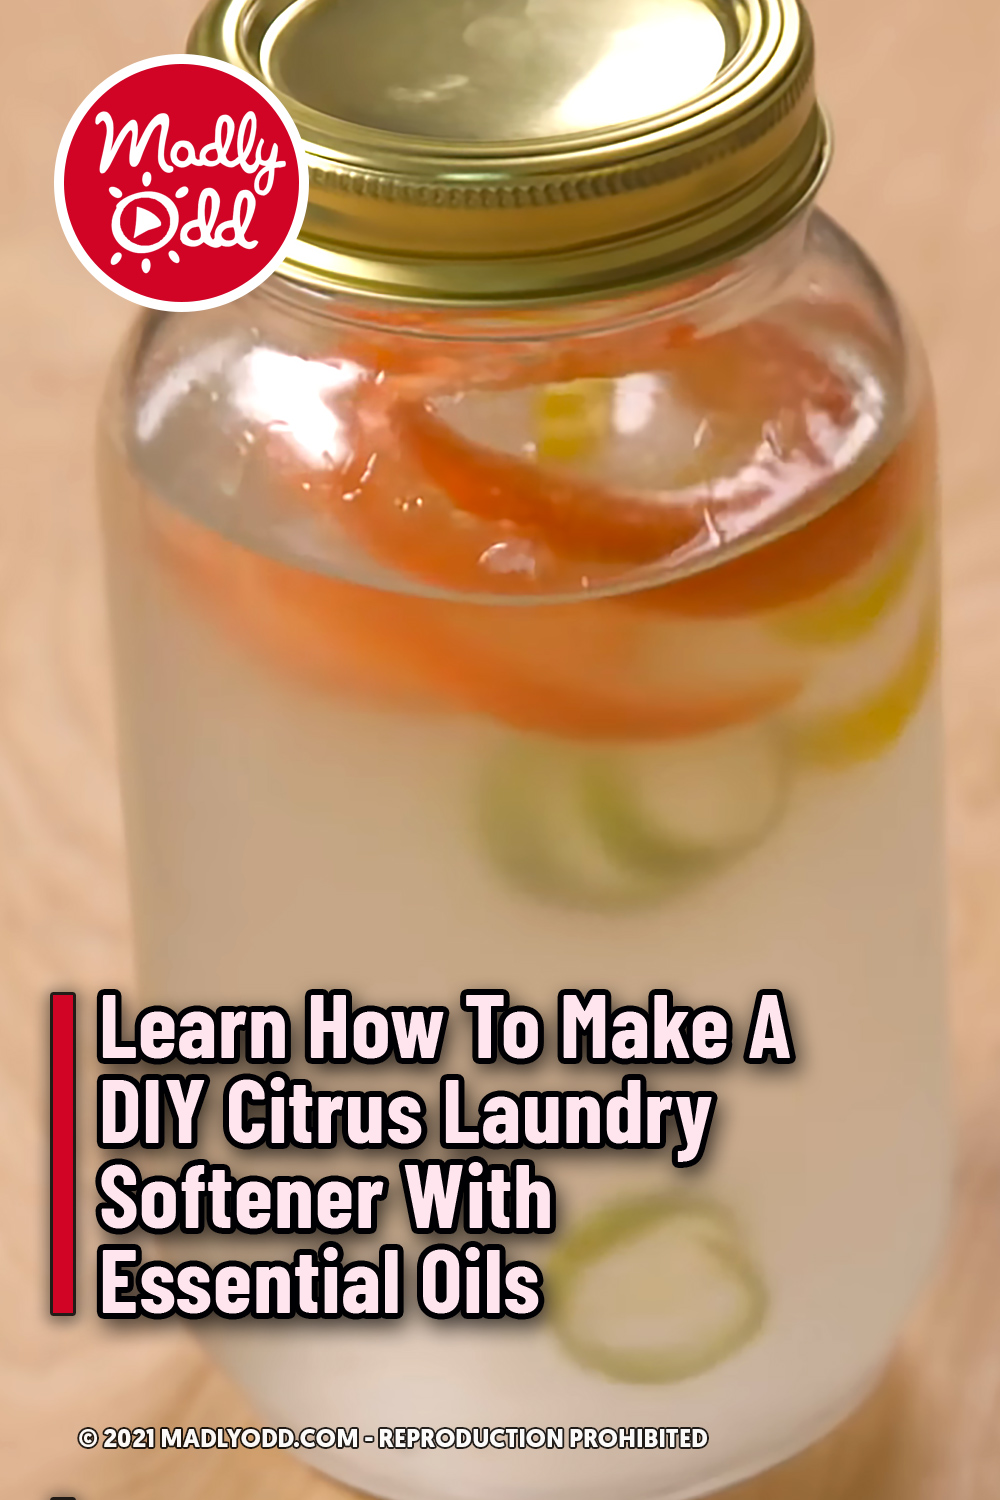 Learn How To Make A DIY Citrus Laundry Softener With Essential Oils